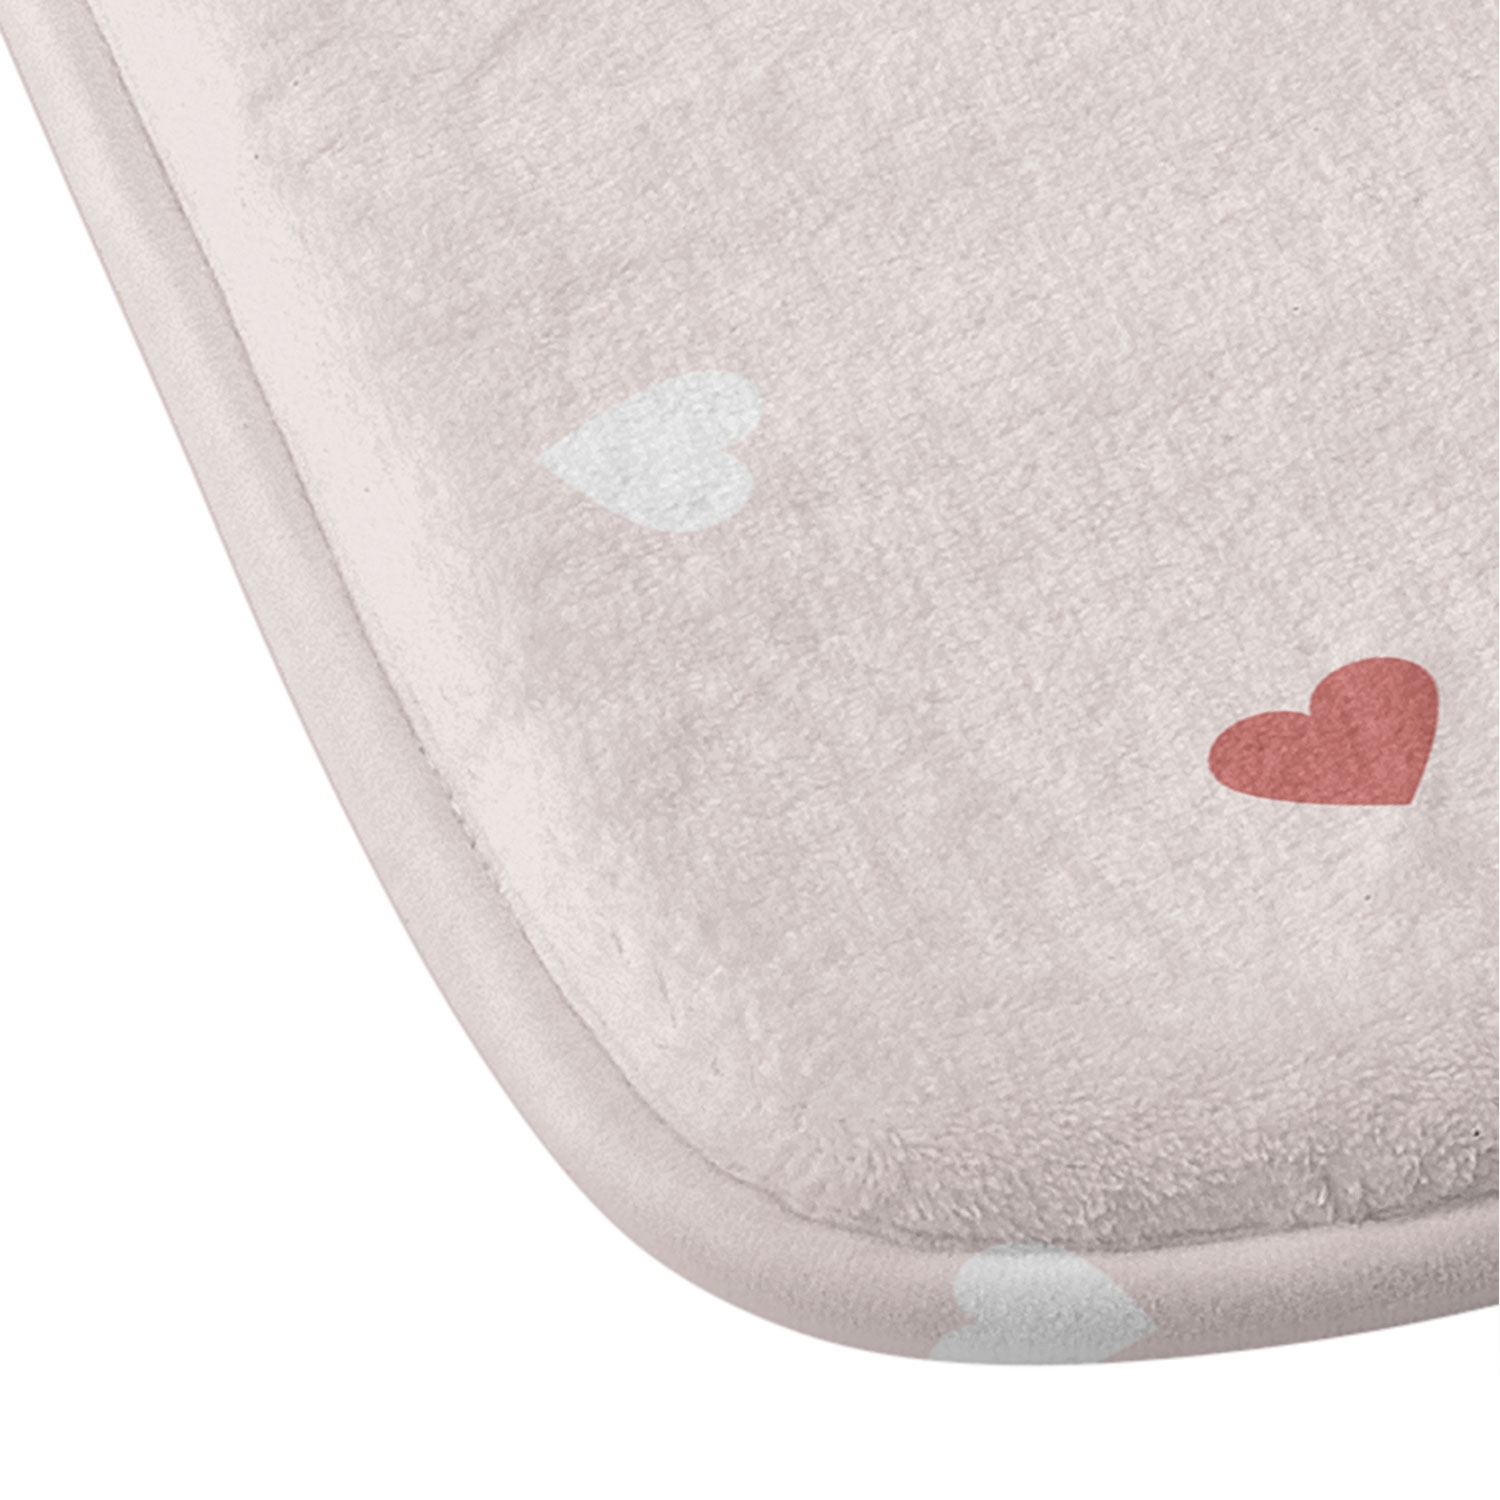 Mini Red Pink And White Hearts by Cuss Yeah Designs - Memory Foam Bath Mat 21" x 34" - Image 2